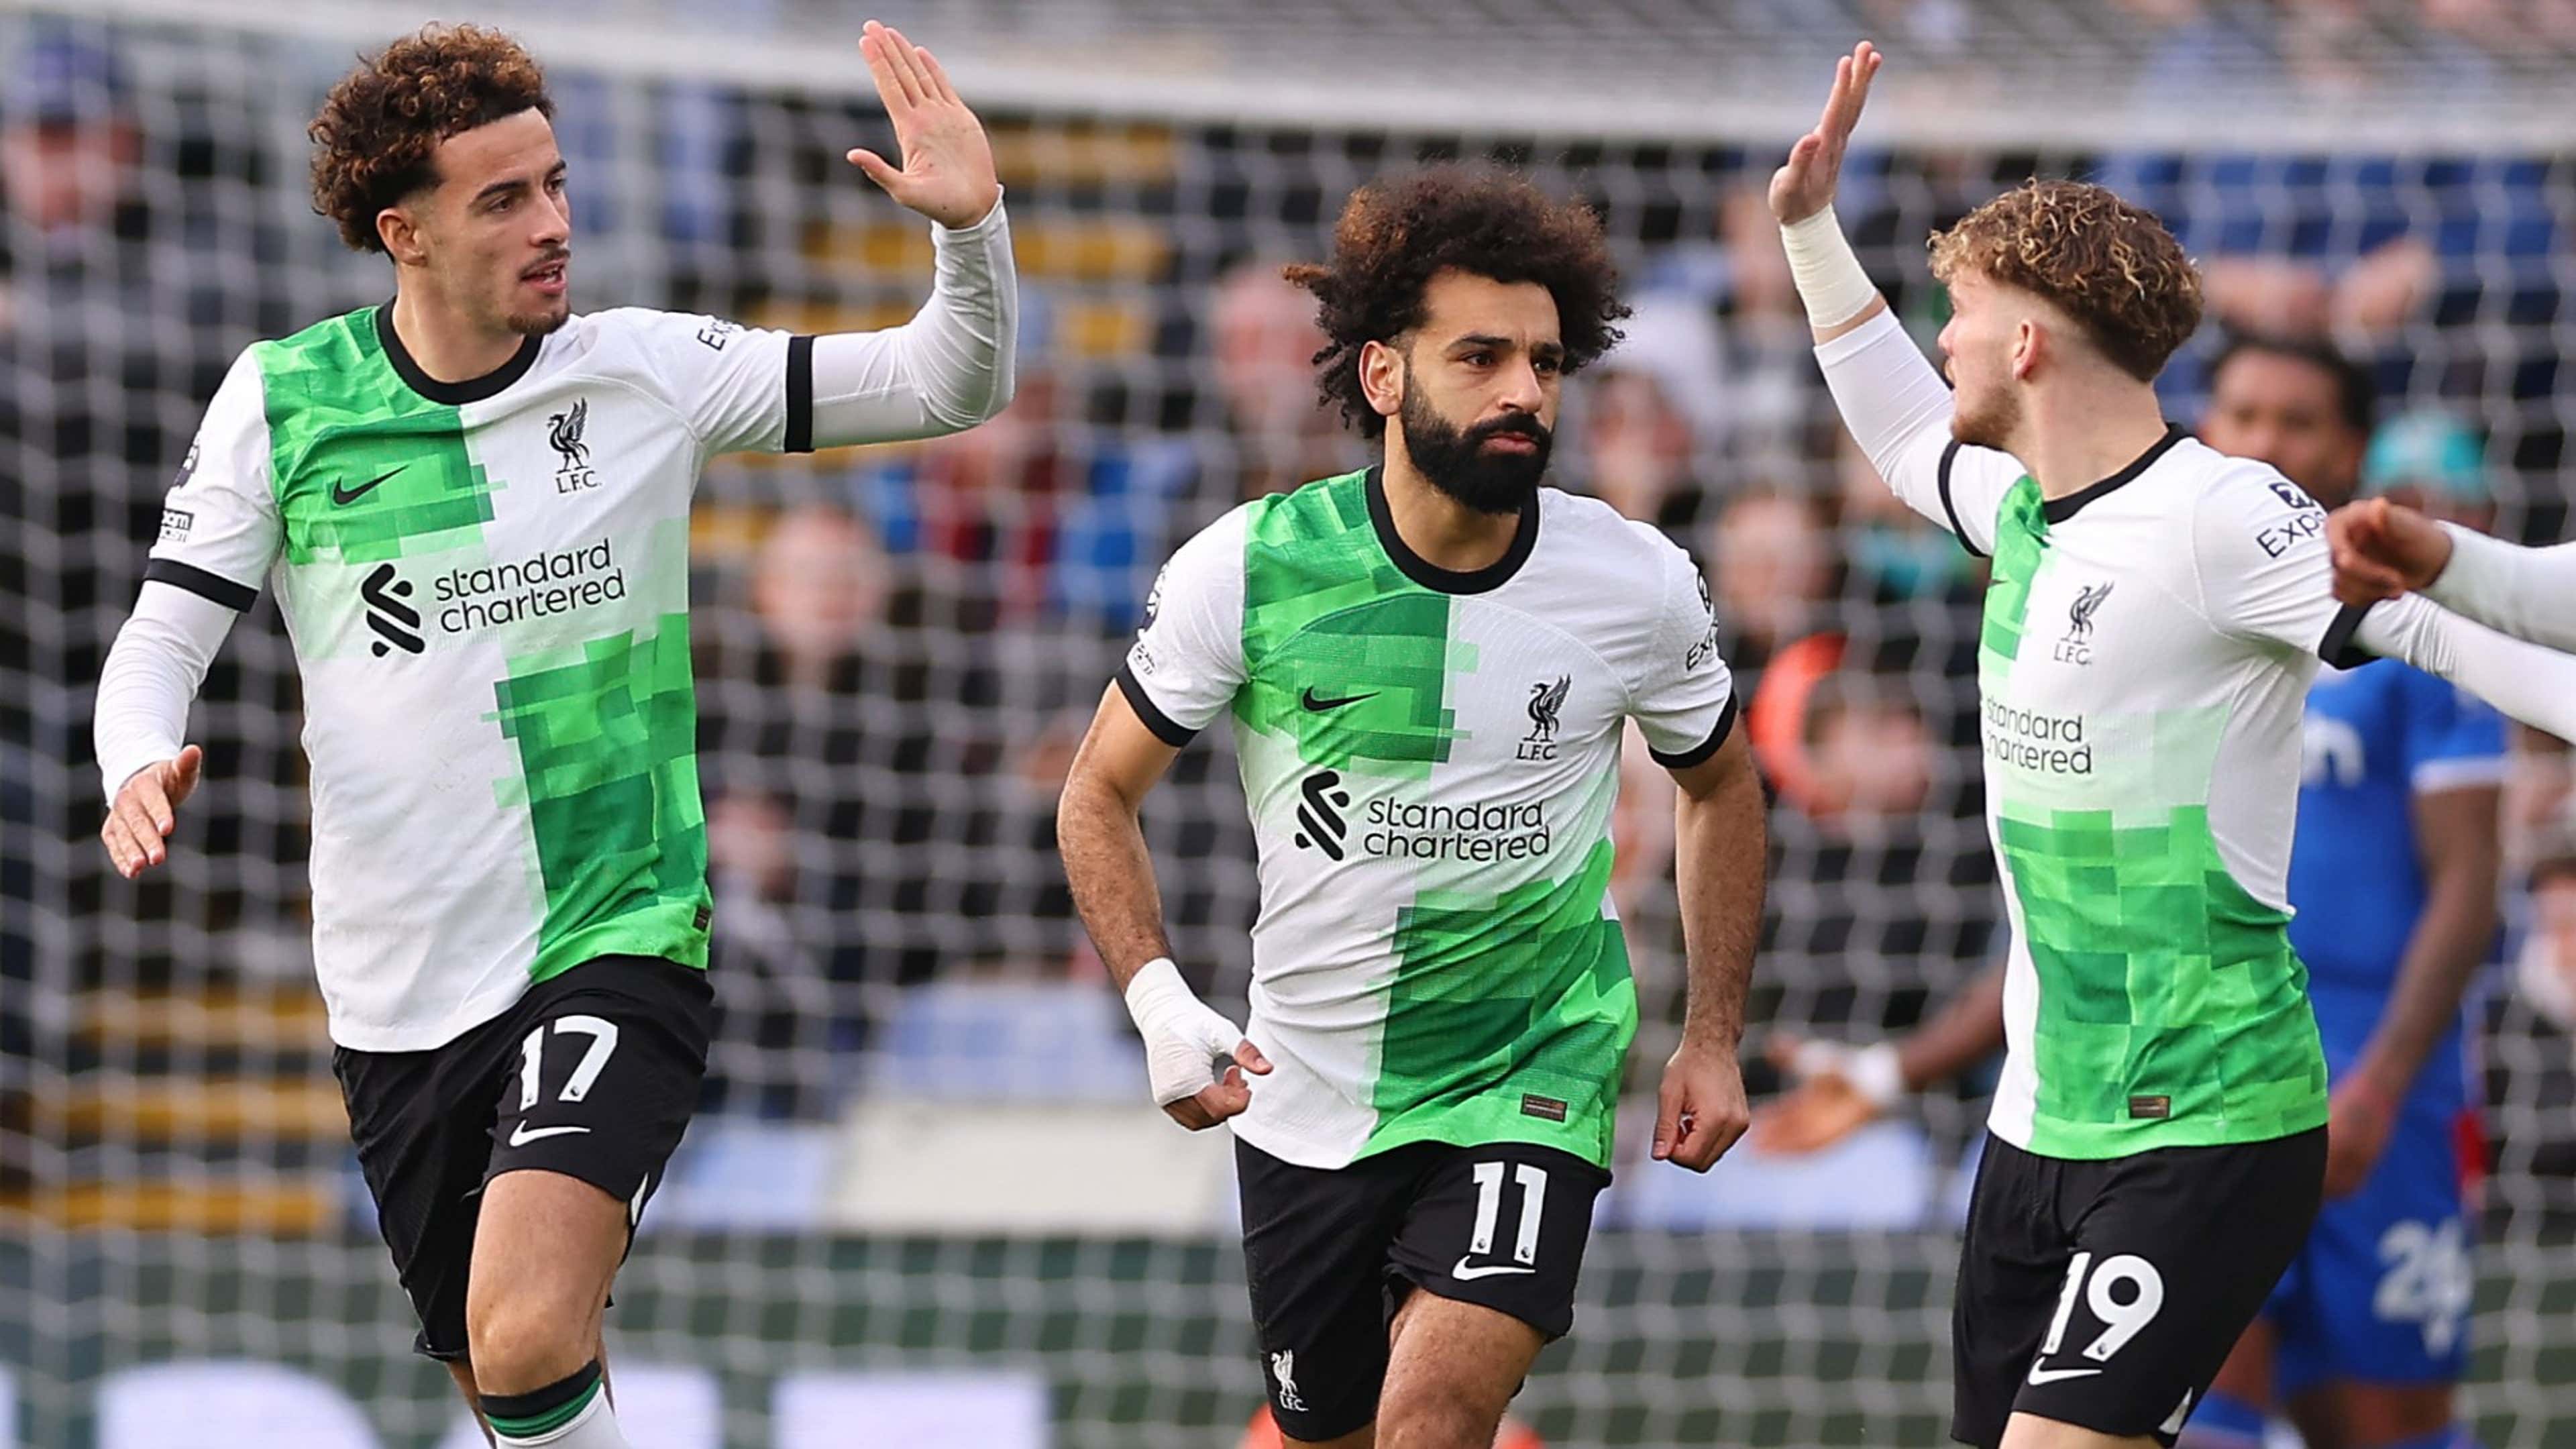 Explained: Why Liverpool talisman Mohamed Salah has joined David